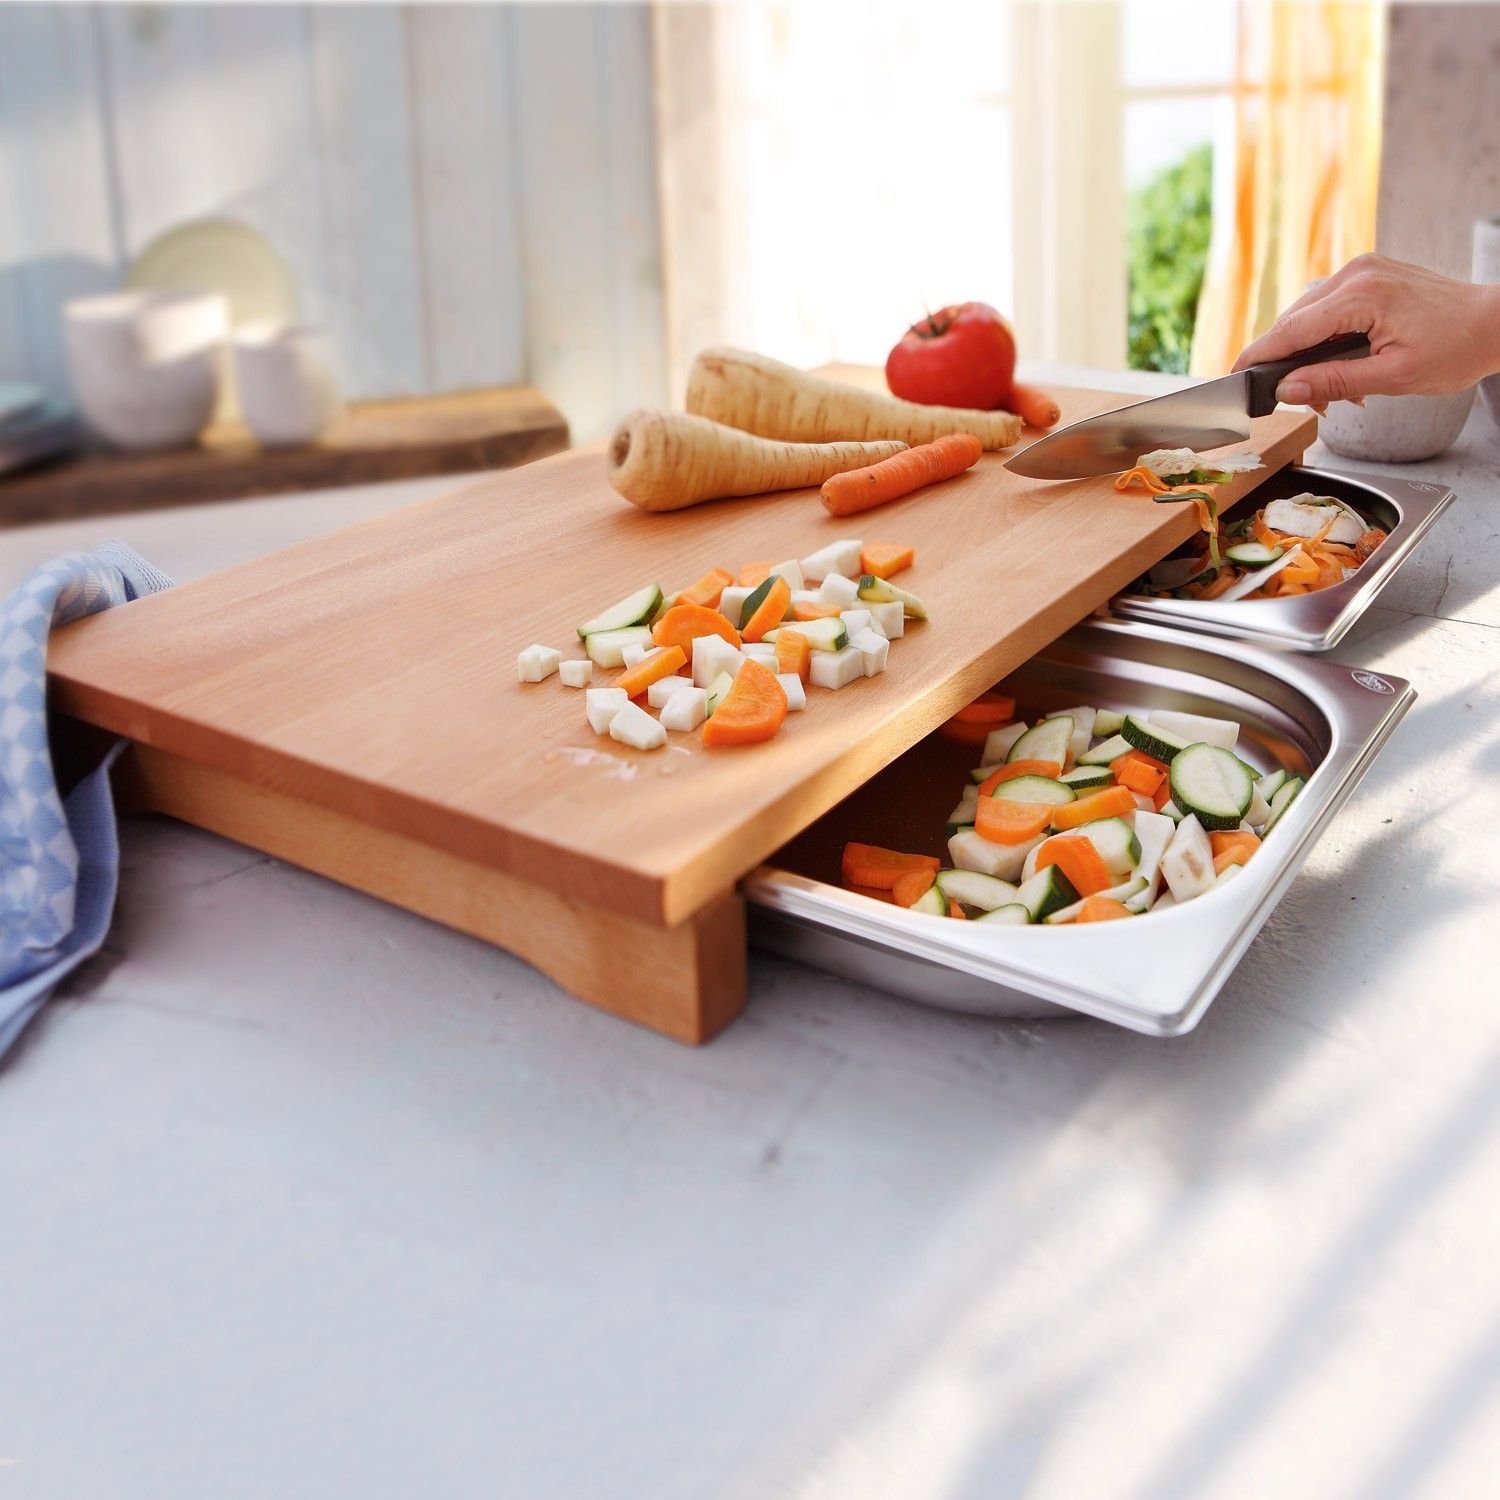 Unique cutting boards that are fun to cook and introduce